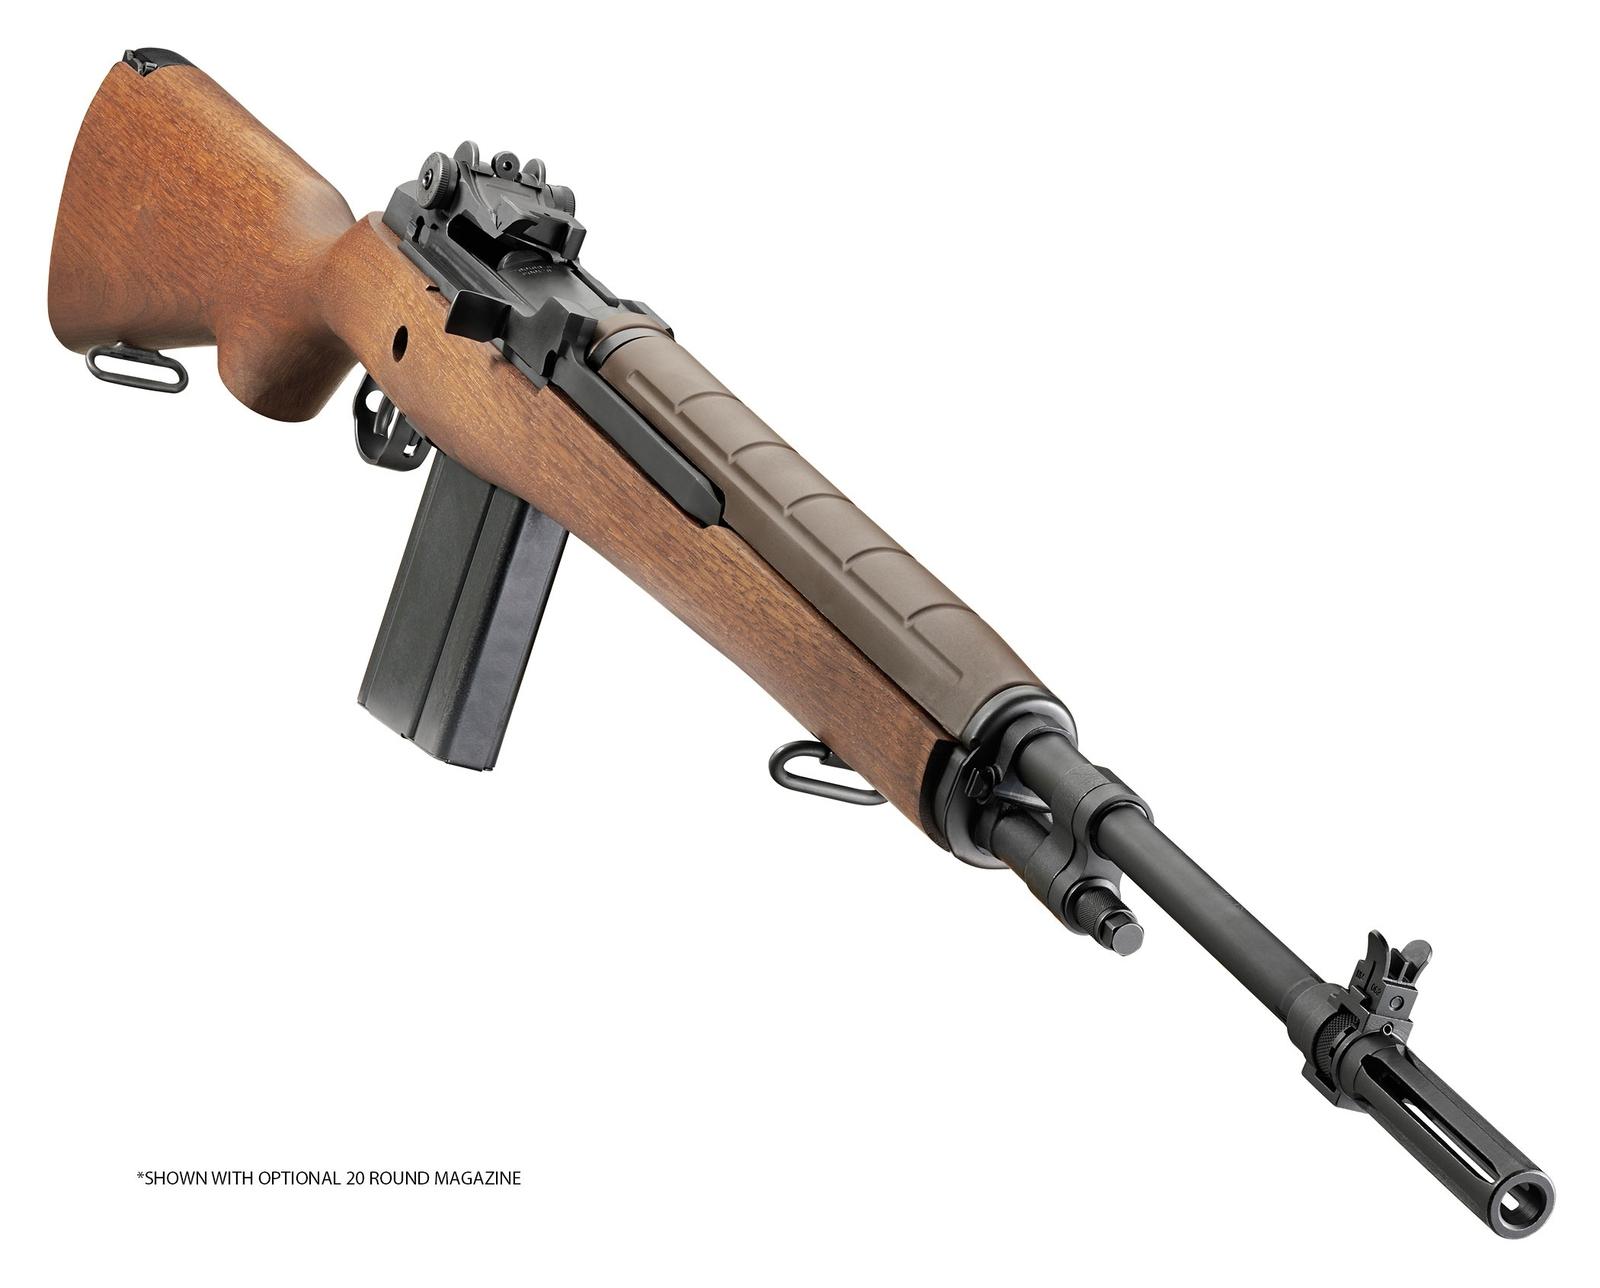  Springfield Armory M1A™ STANDARD ISSUE RIFLE .308 4